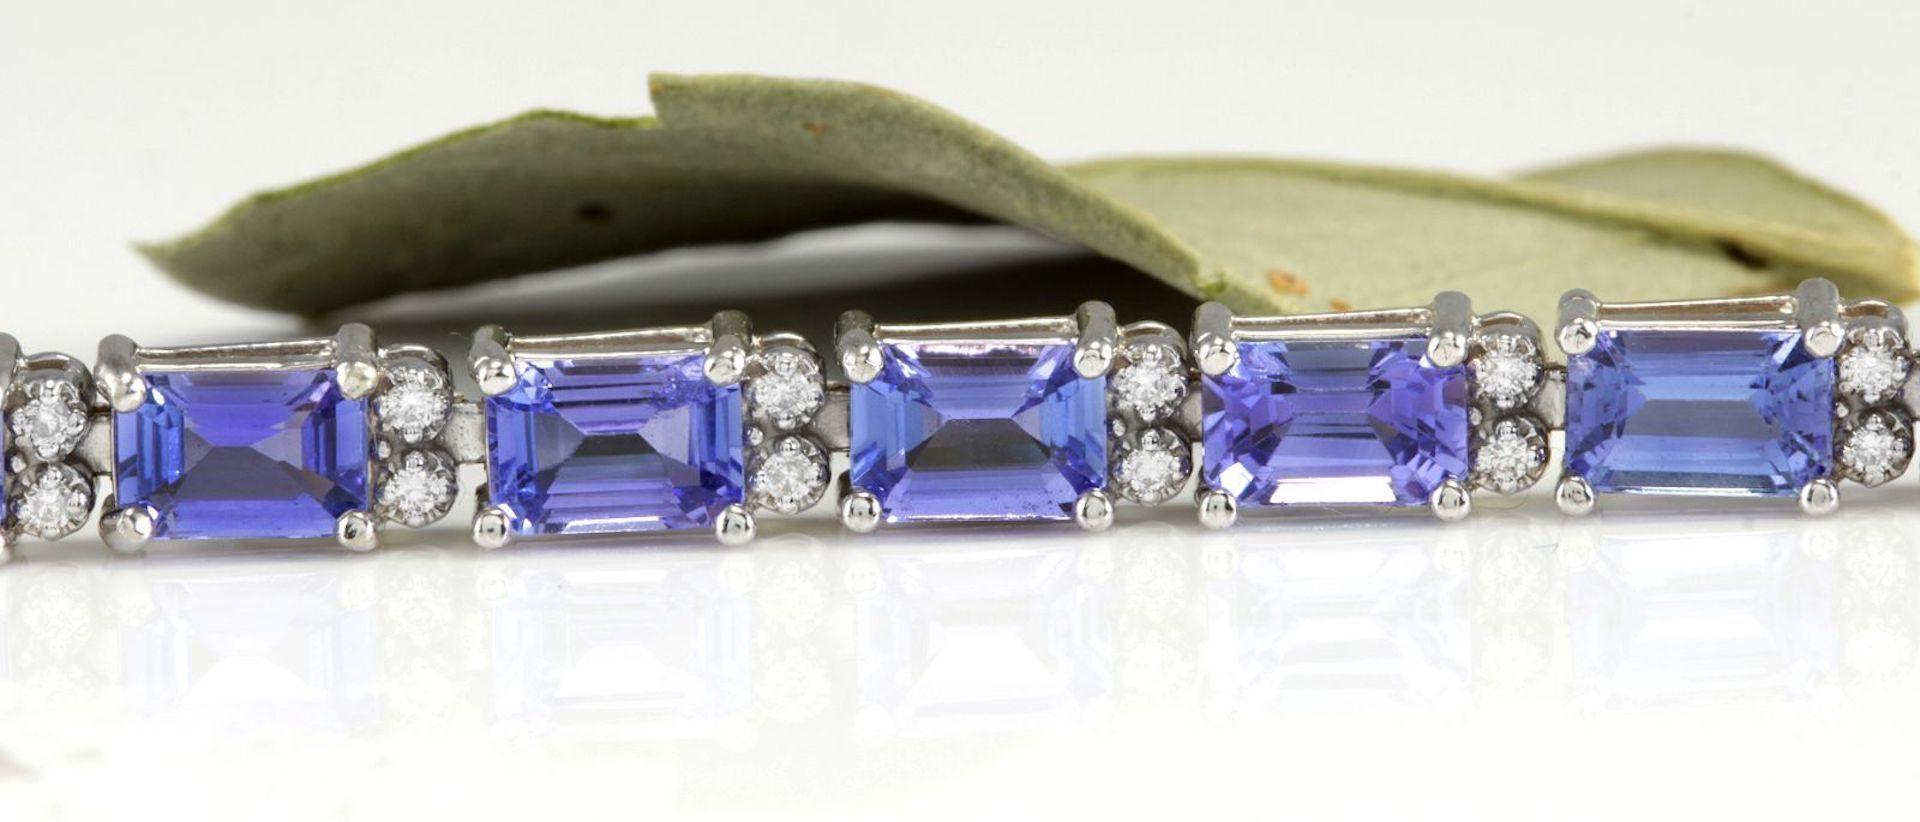 Very Impressive 12.45 Carats Natural Tanzanite & Diamond 14K Solid White Gold Bracelet

STAMPED: 14K

Total Natural Round Diamonds Weight: .45Carats (color F-G / Clarity VS2-SI1)

Total Natural Tanzanites Weight is: 12.00 carats

Bracelet length is: